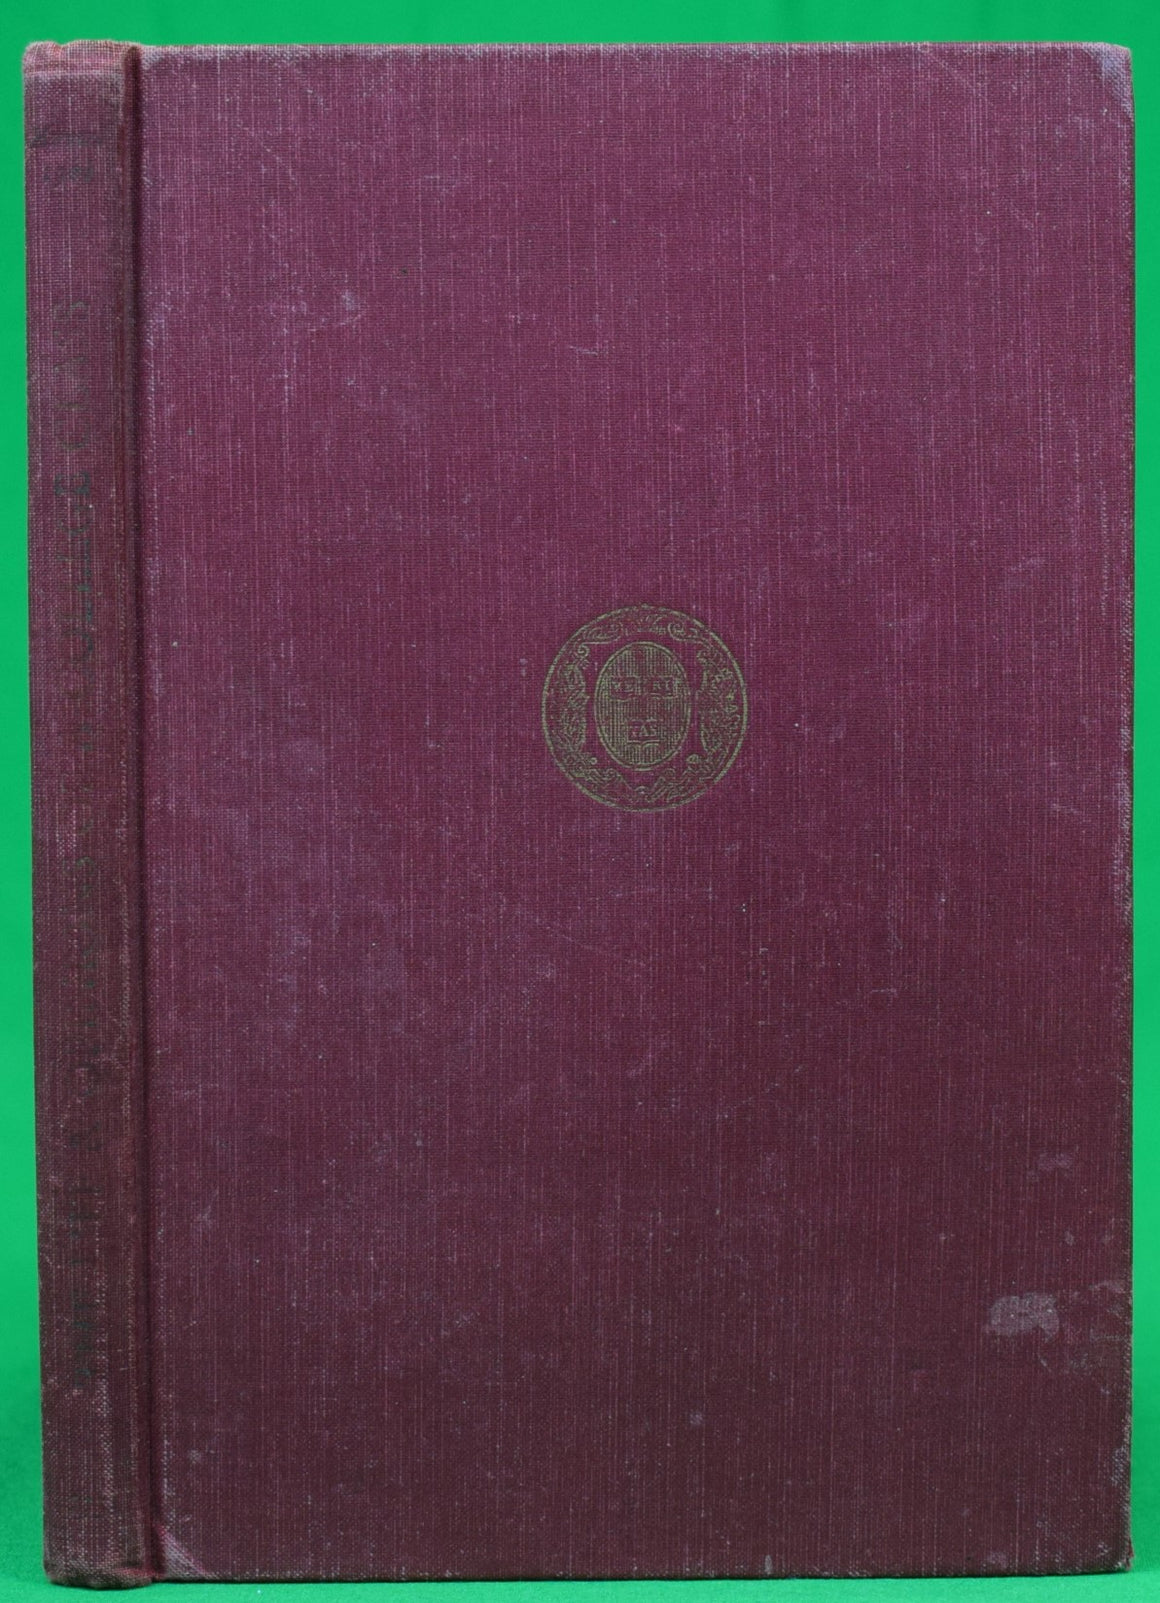 "Harvard 1926: The Life And Opinions Of A College Class" 1951